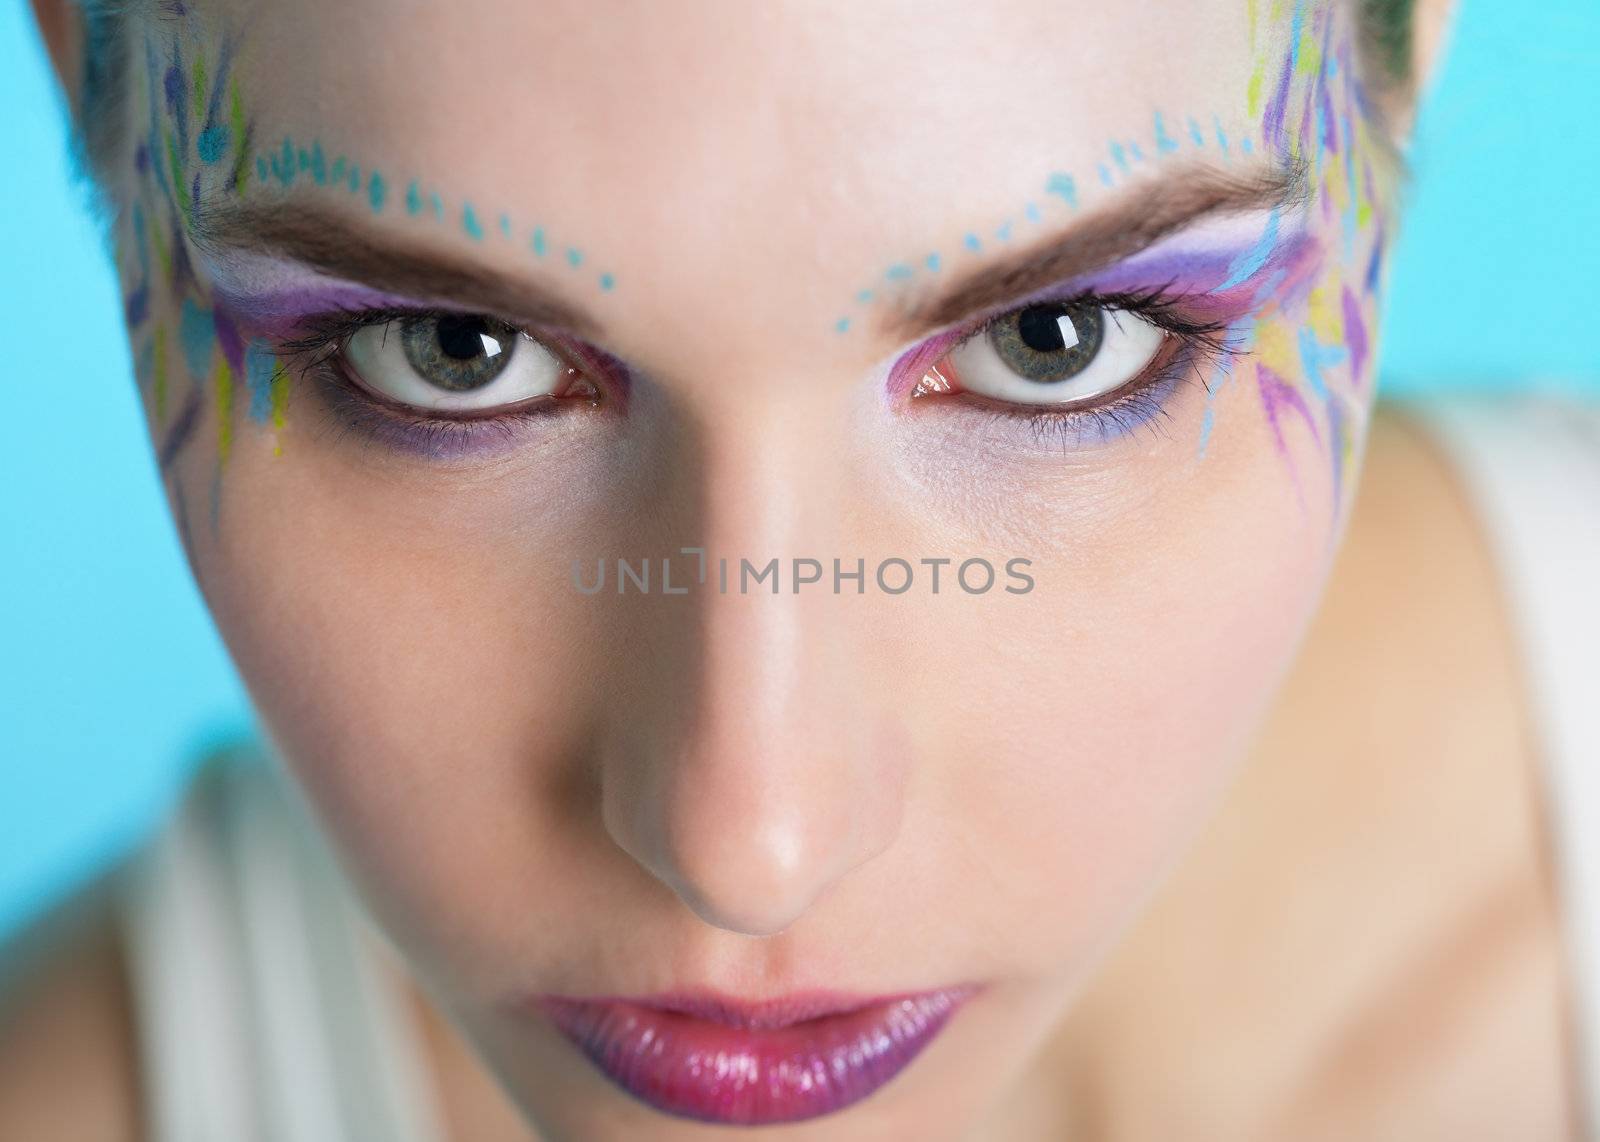 Closeup portrait of a pretty young woman with face art